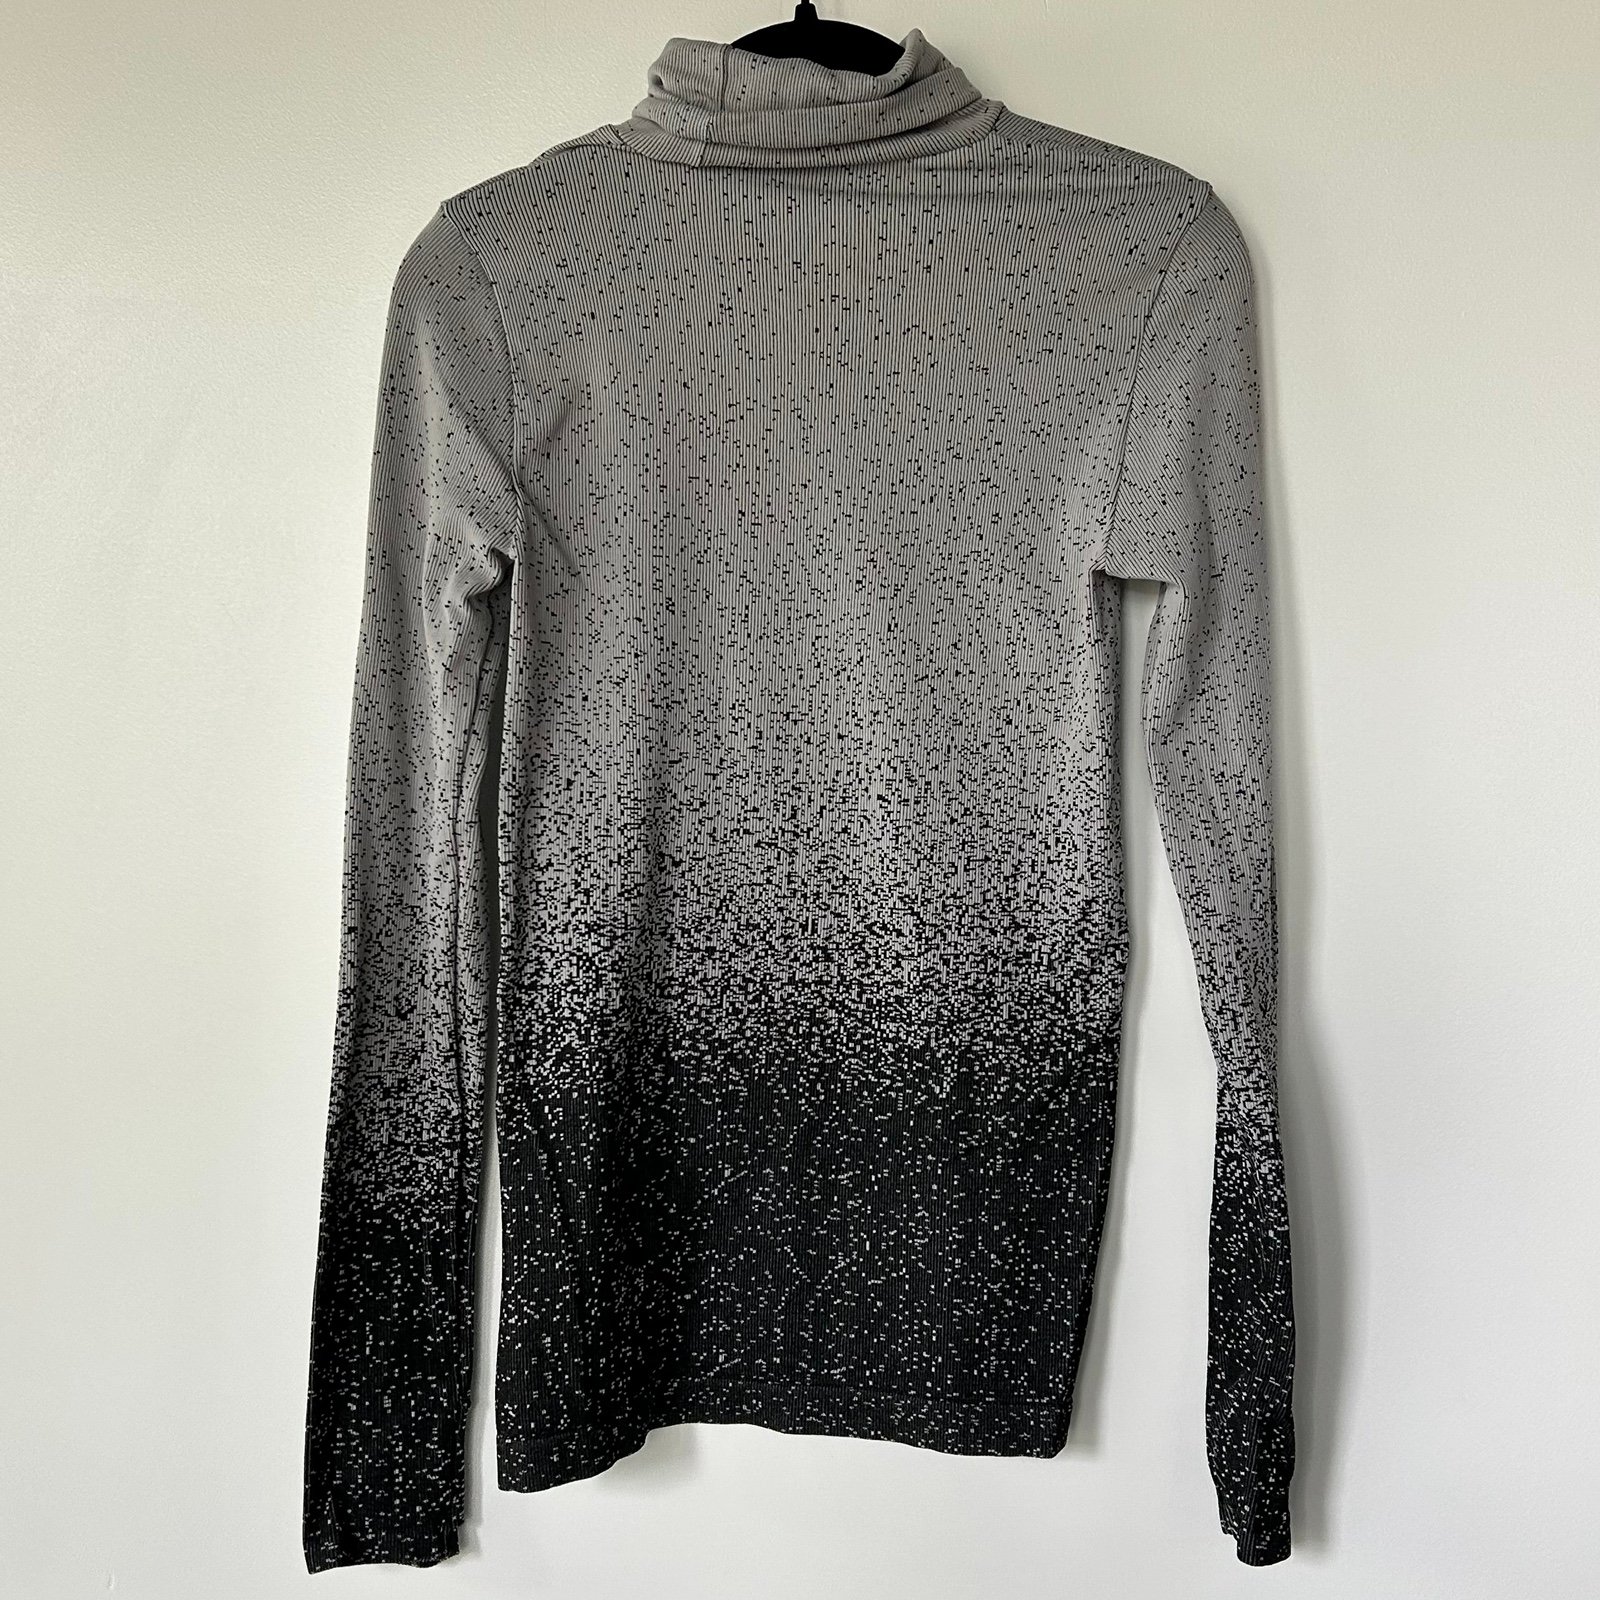 cheapest place to buy  Athleta Flurry Blizzard Gradient Turtleneck Top Size XS OTva2fgiV just for you